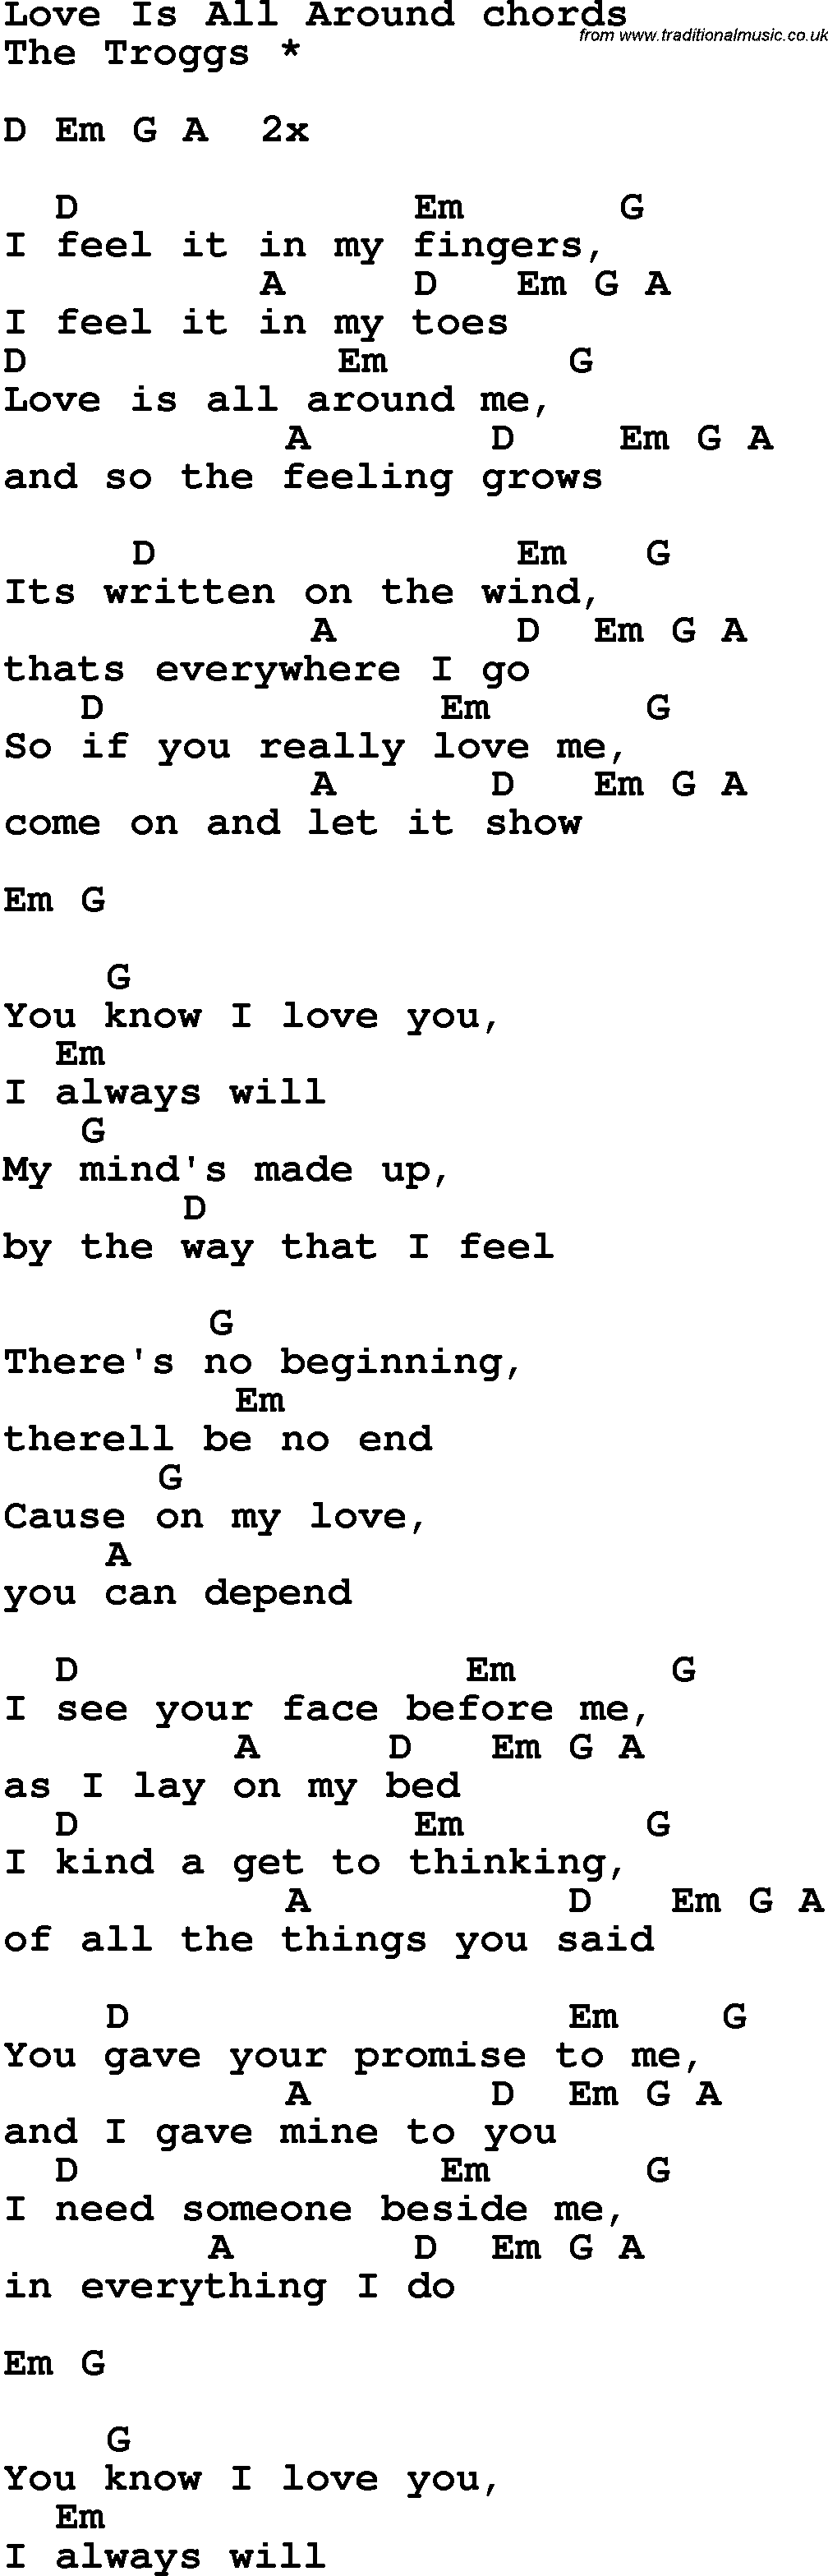 Song Lyrics with guitar chords for Love Is All Around